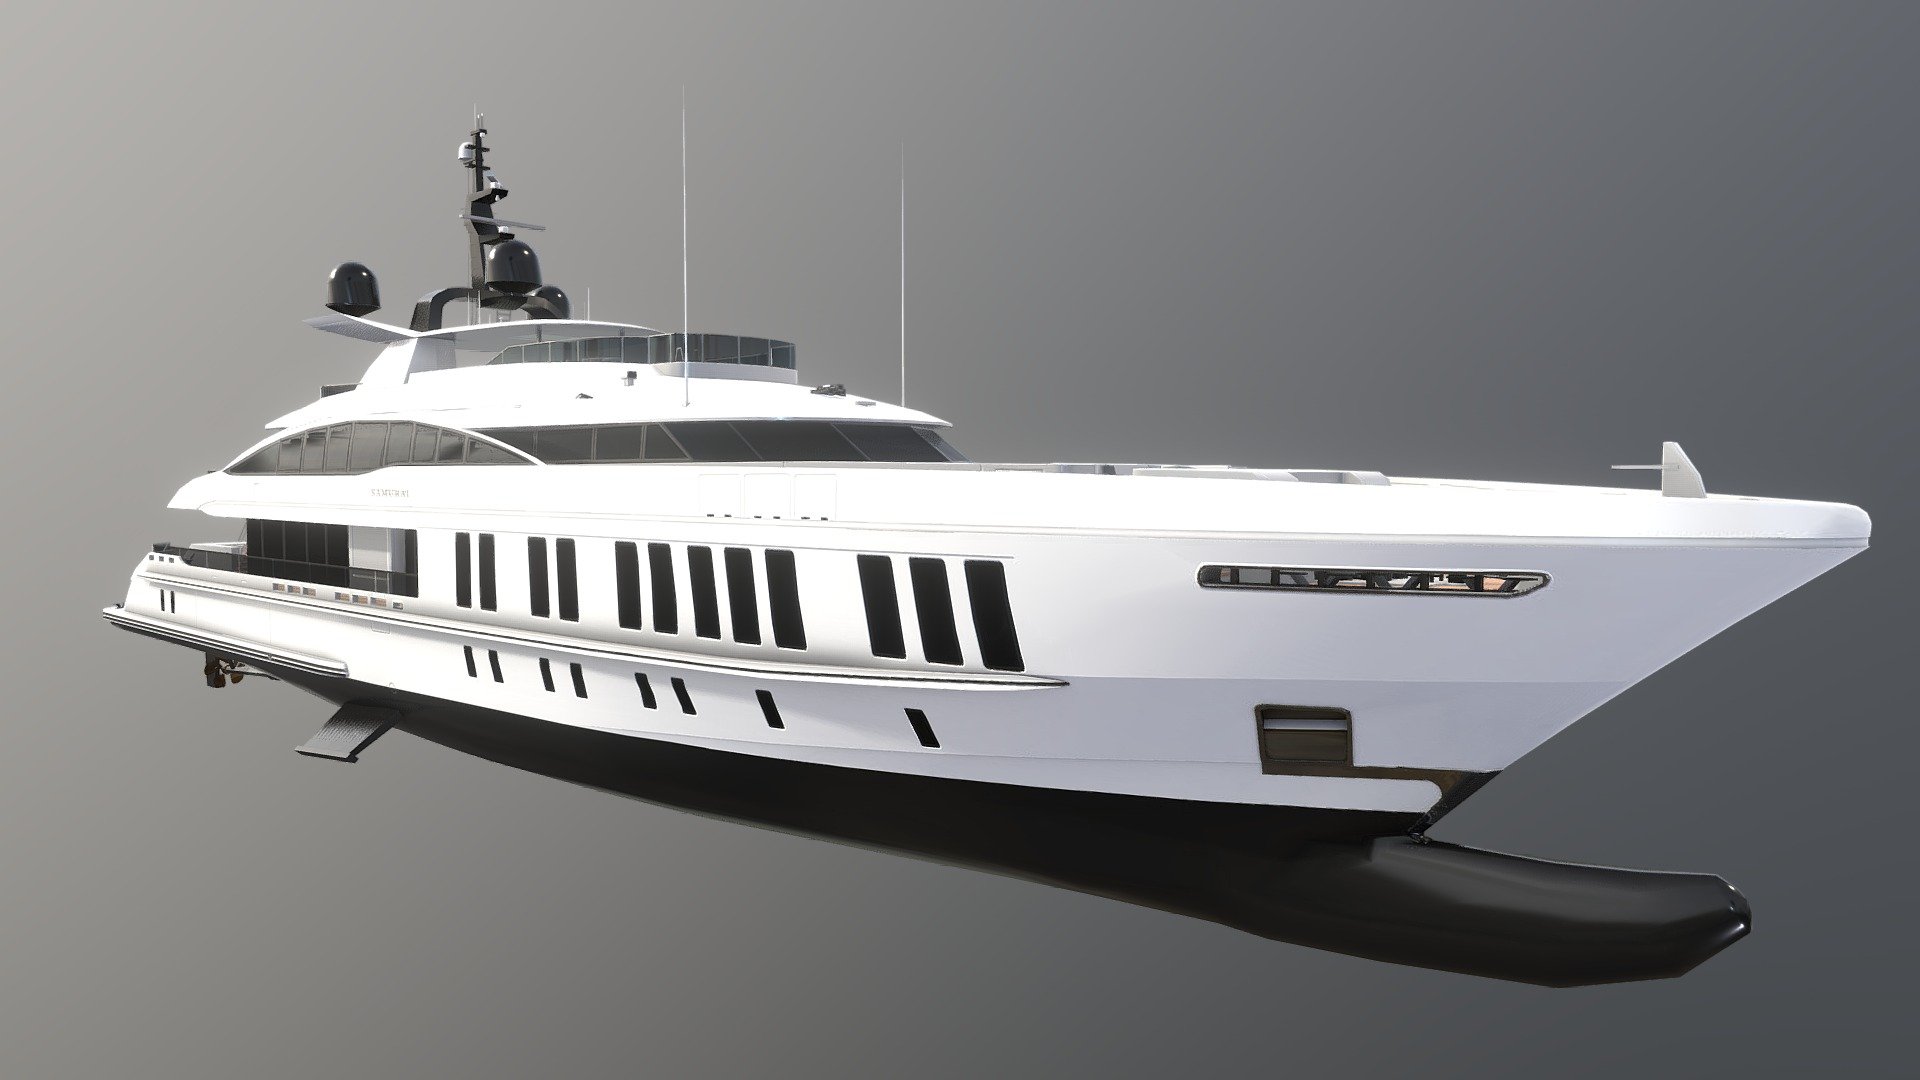 made in Maya, Textured in Substance Painter - Samurai yacht - 3D model by Gingerbread (@aerialmace) 3d model